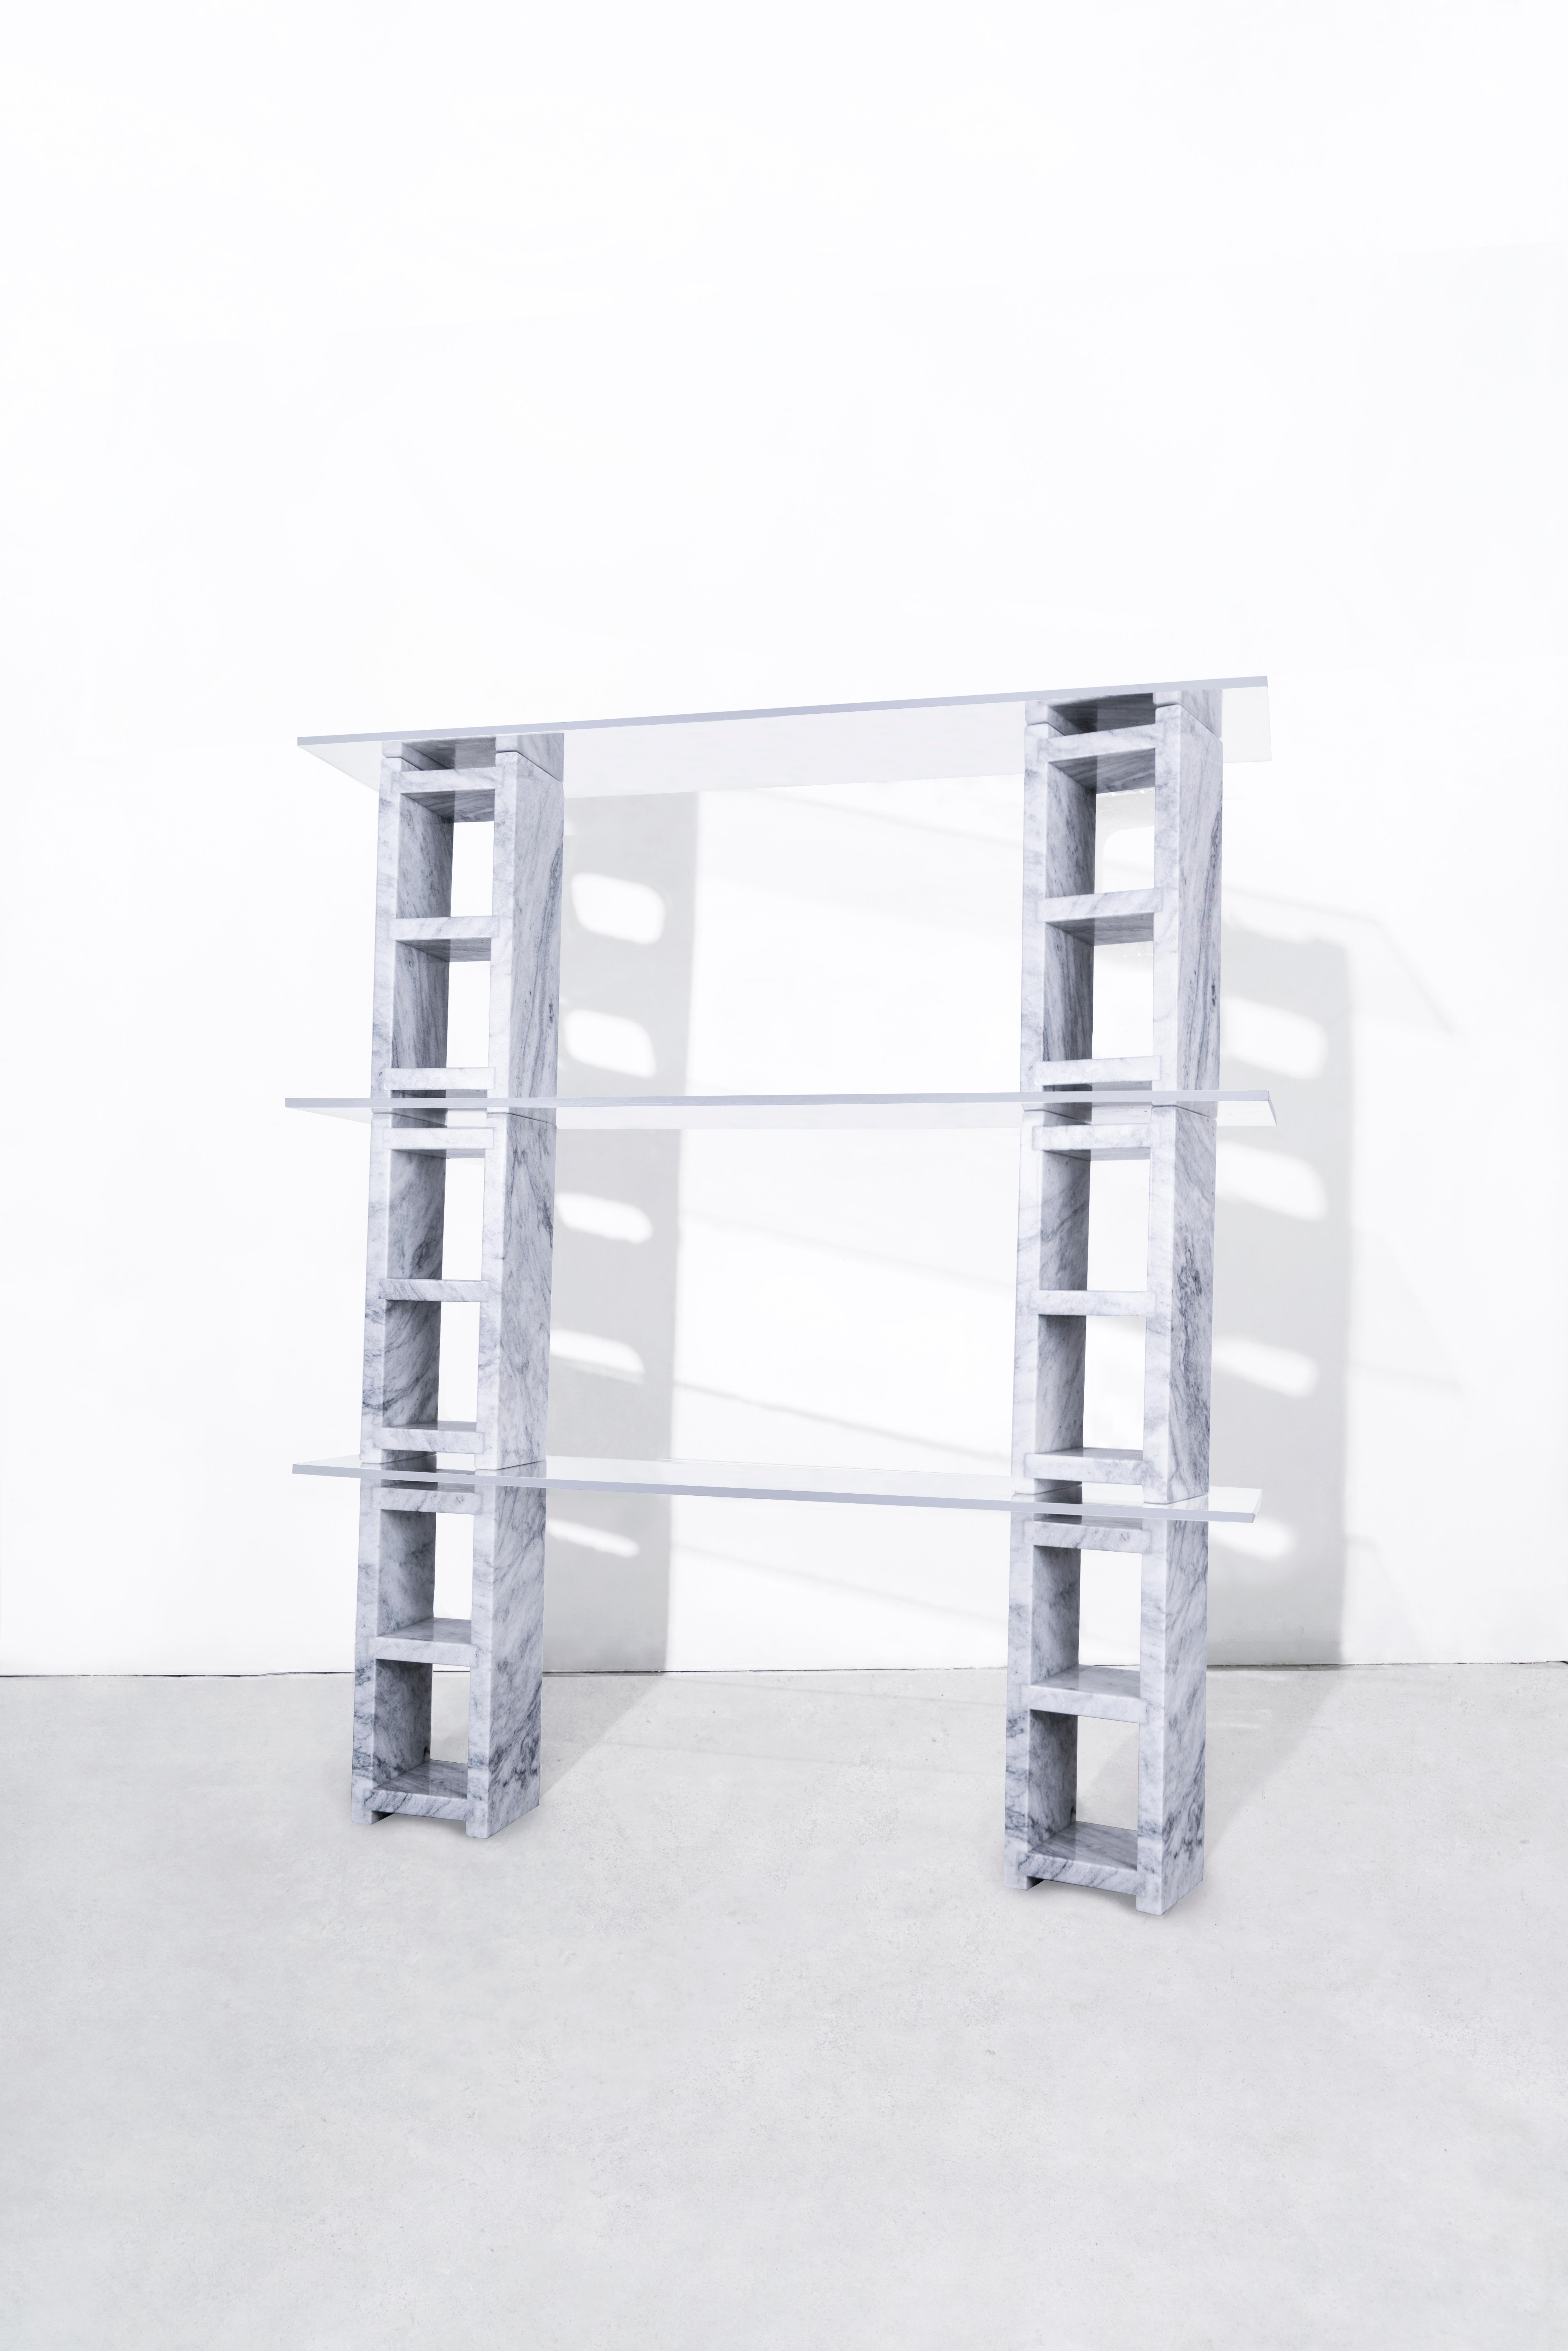 DESCRIPTION
6 water jet cut, hand-polished carrara marble blocks, supporting 3 tempered glass shelves.
Starphire glass shelves.
Modular.
Made to order in nyc.

DIMENSIONS
Cinder Block length 18.75?
Cinder block width 7.5” 
Cinder block